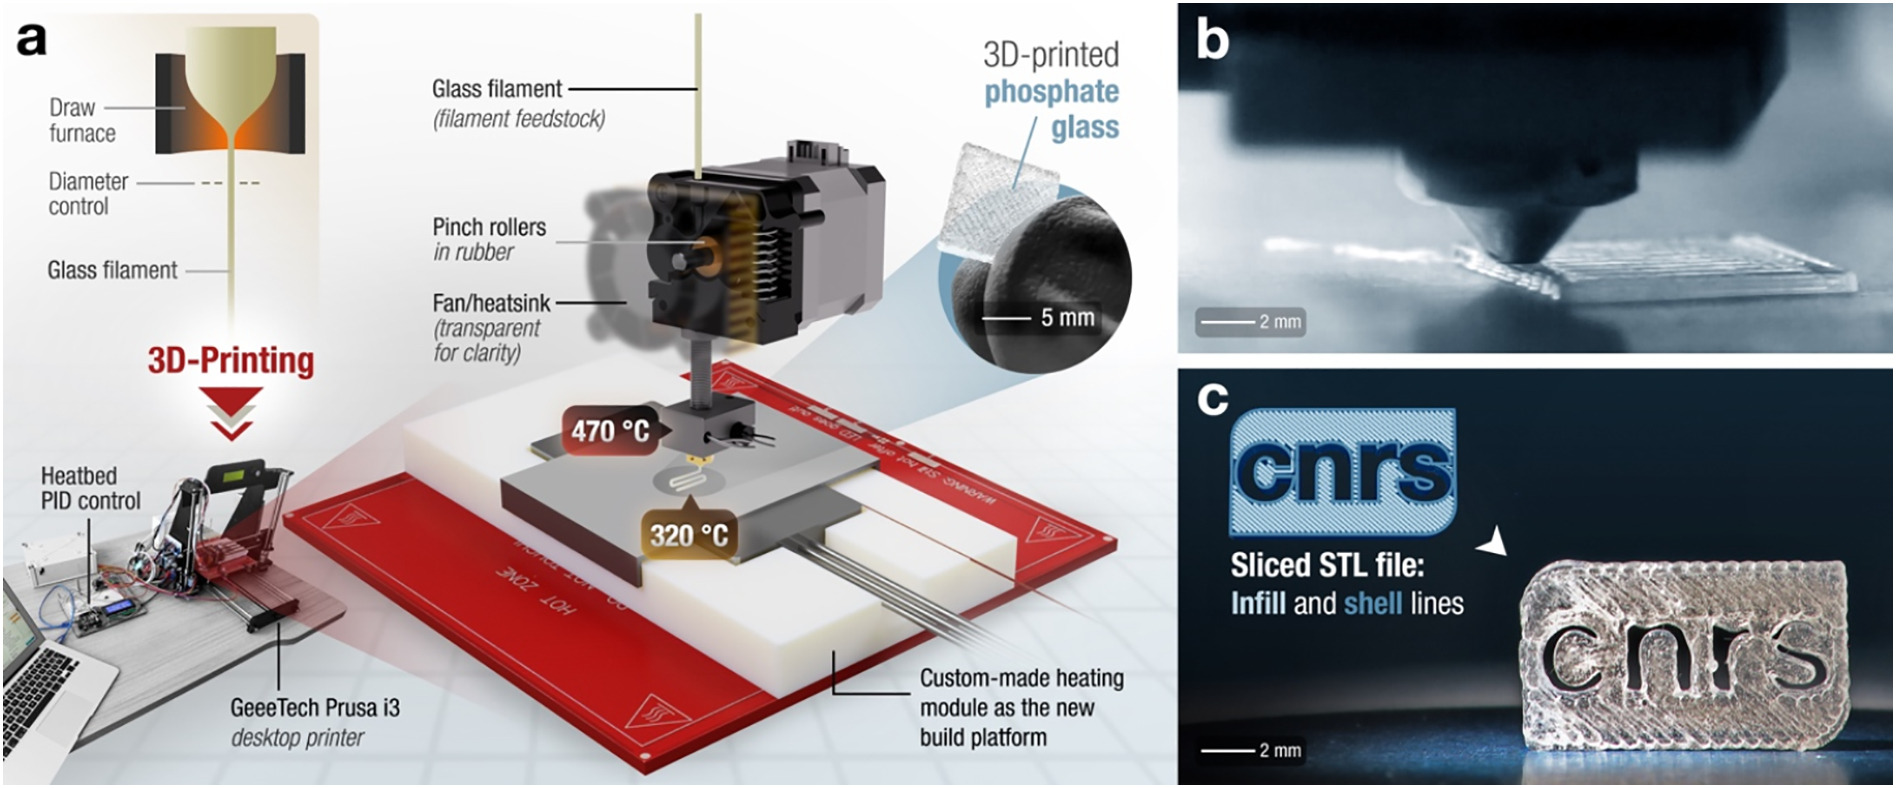 French researchers successful in 3D printing super high-resolution glass - Industry